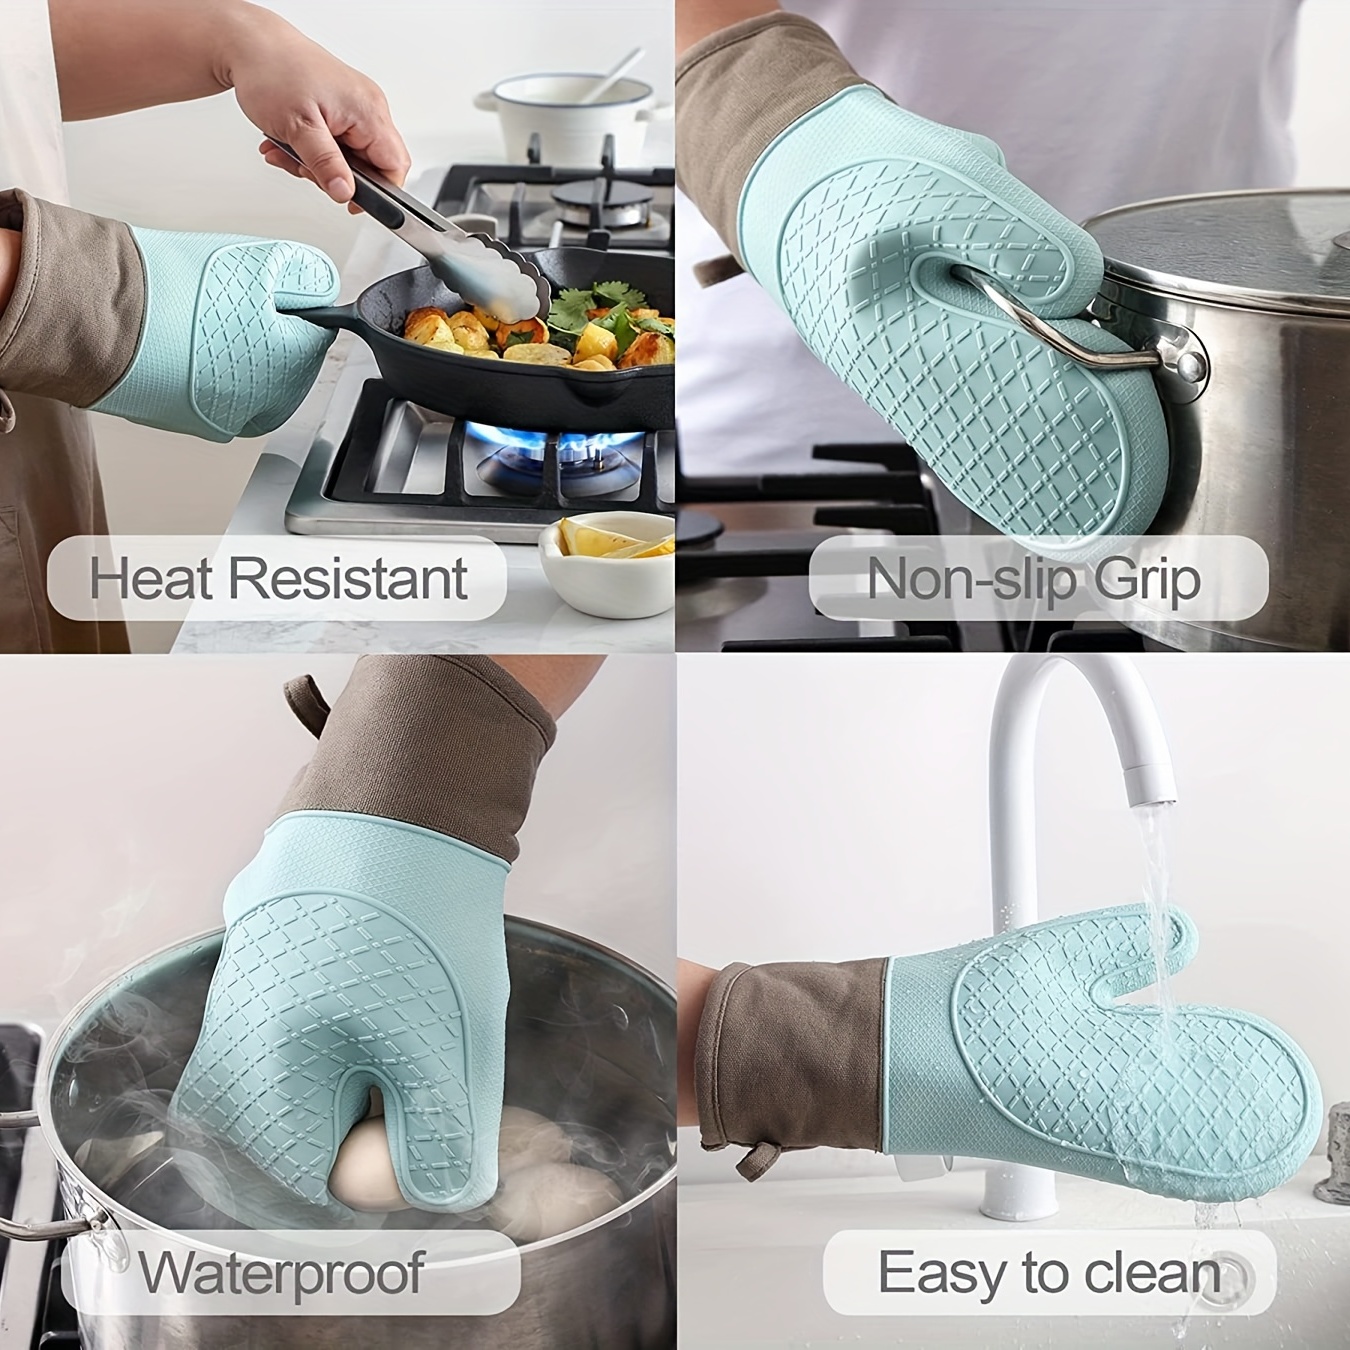 Oven Mitts Heat Resistant, Silicone Oven Mitts,2pcs Waterproof